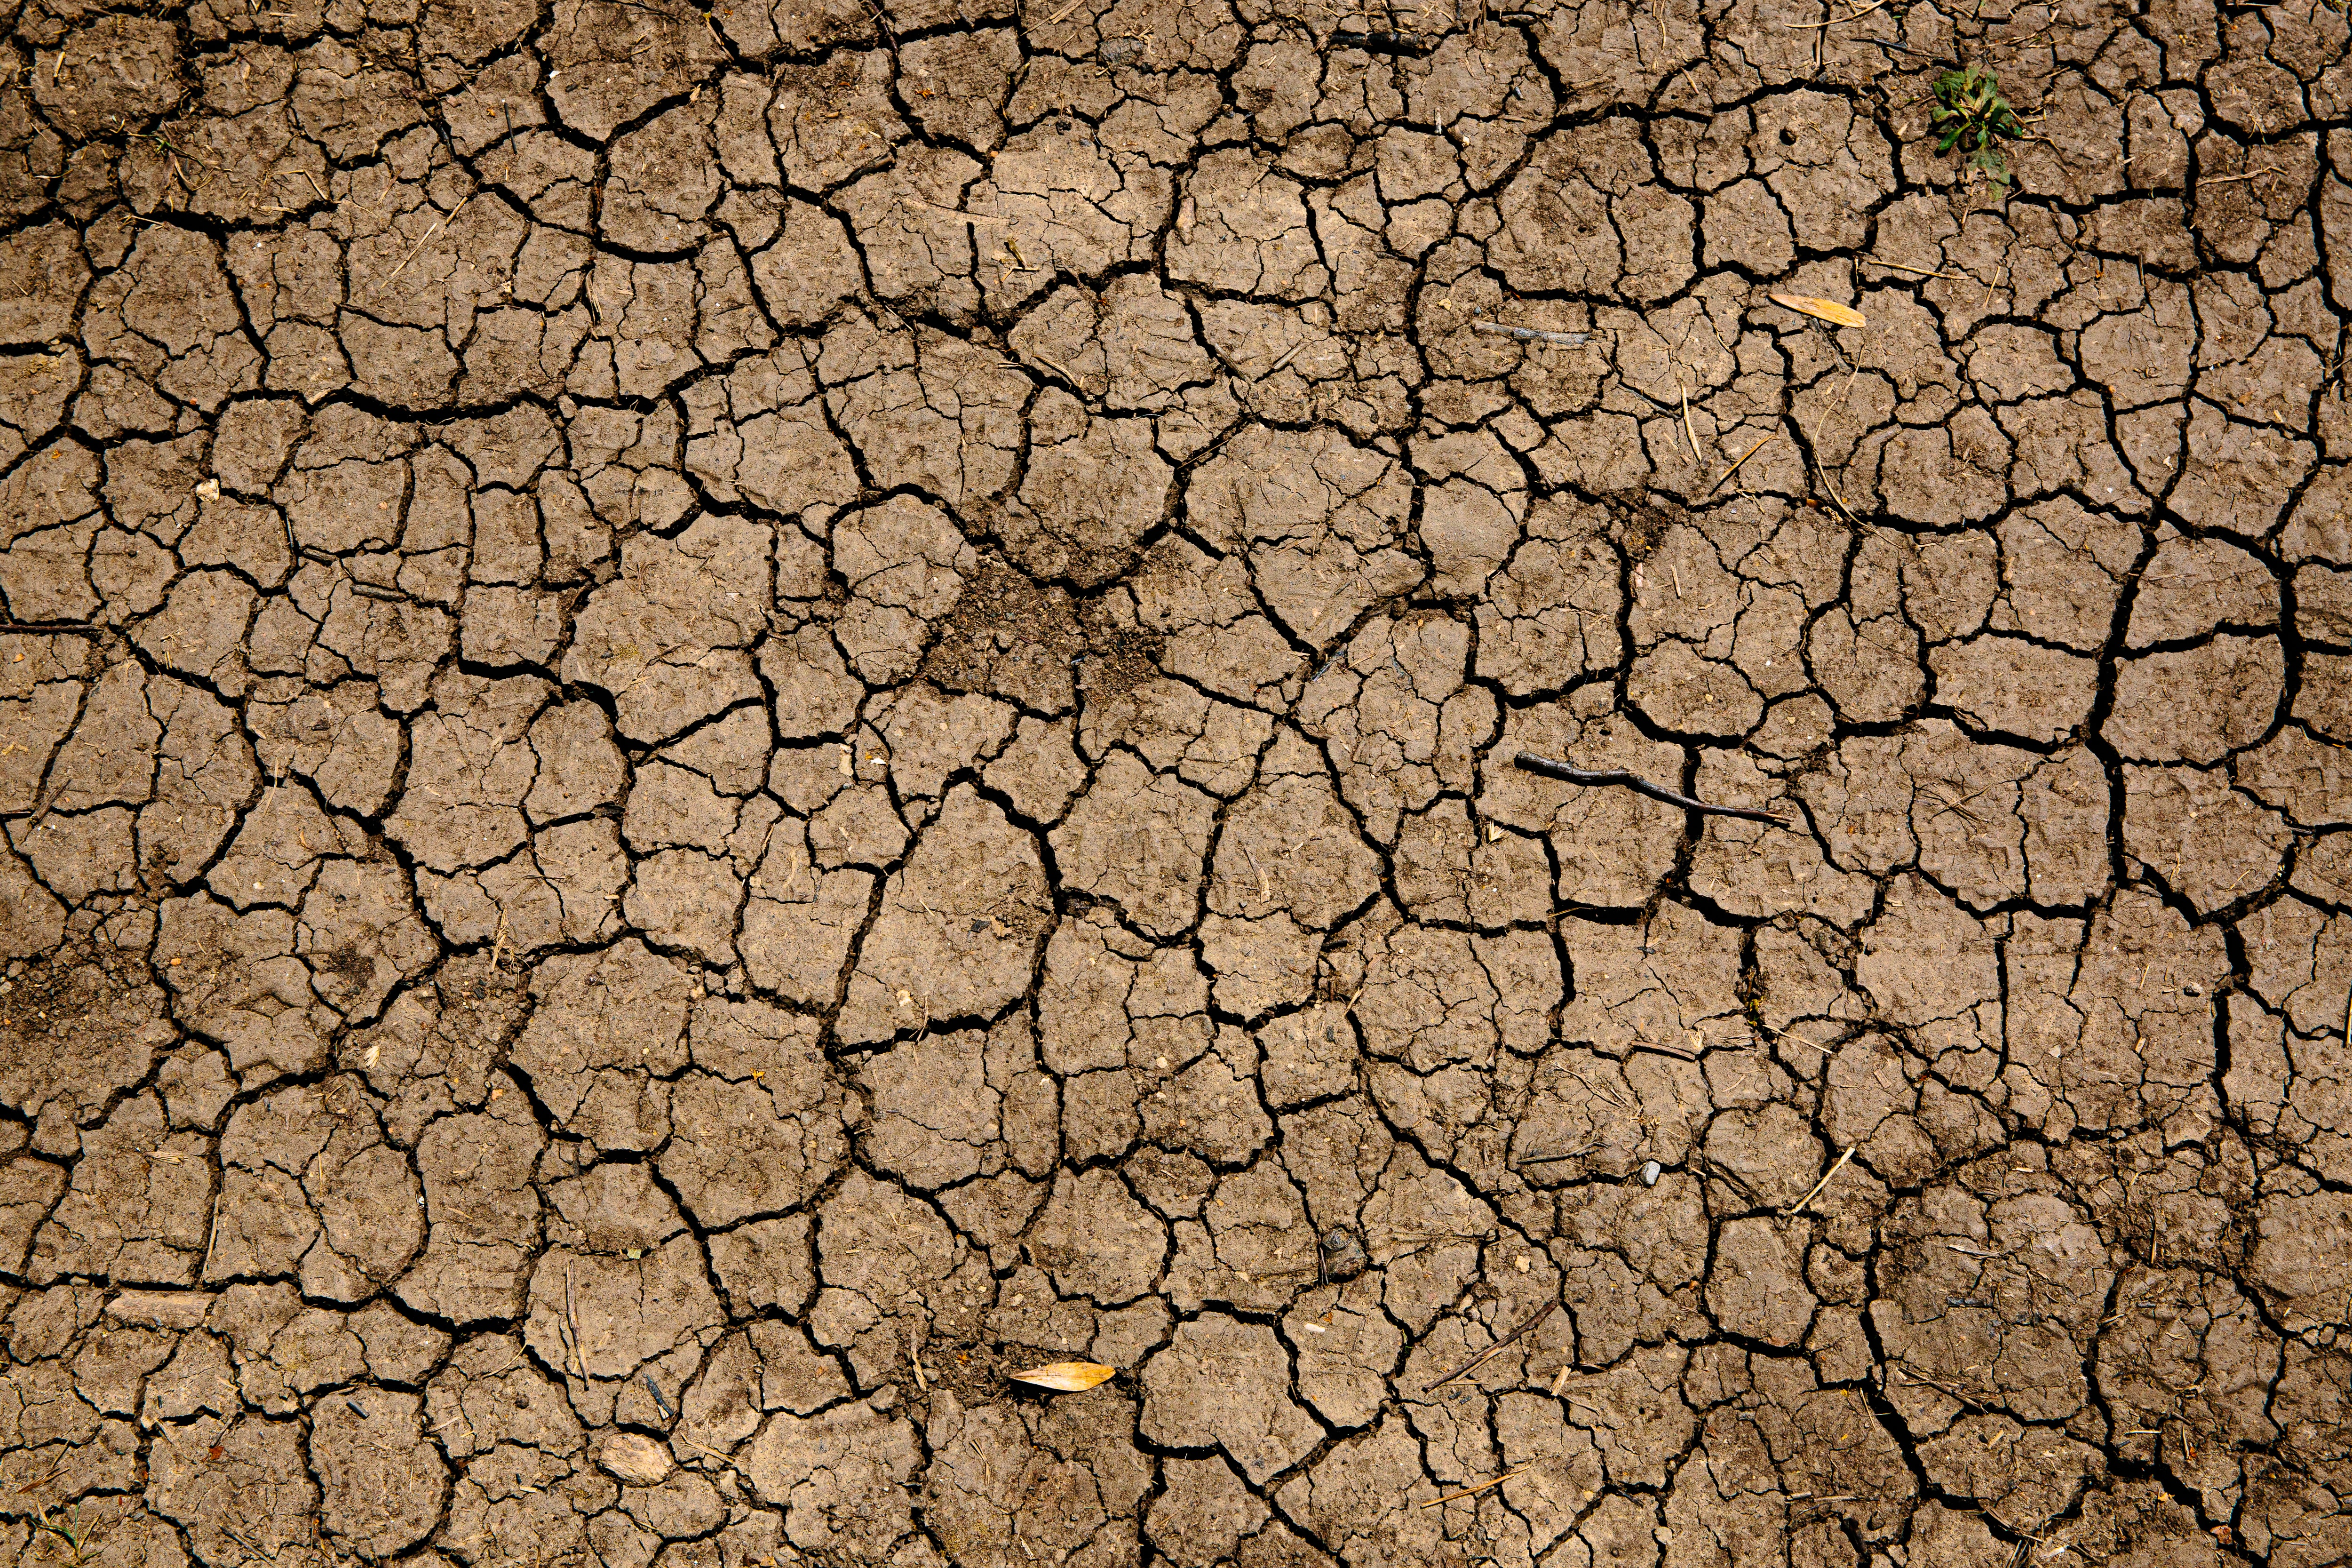 drought-cracked-soil